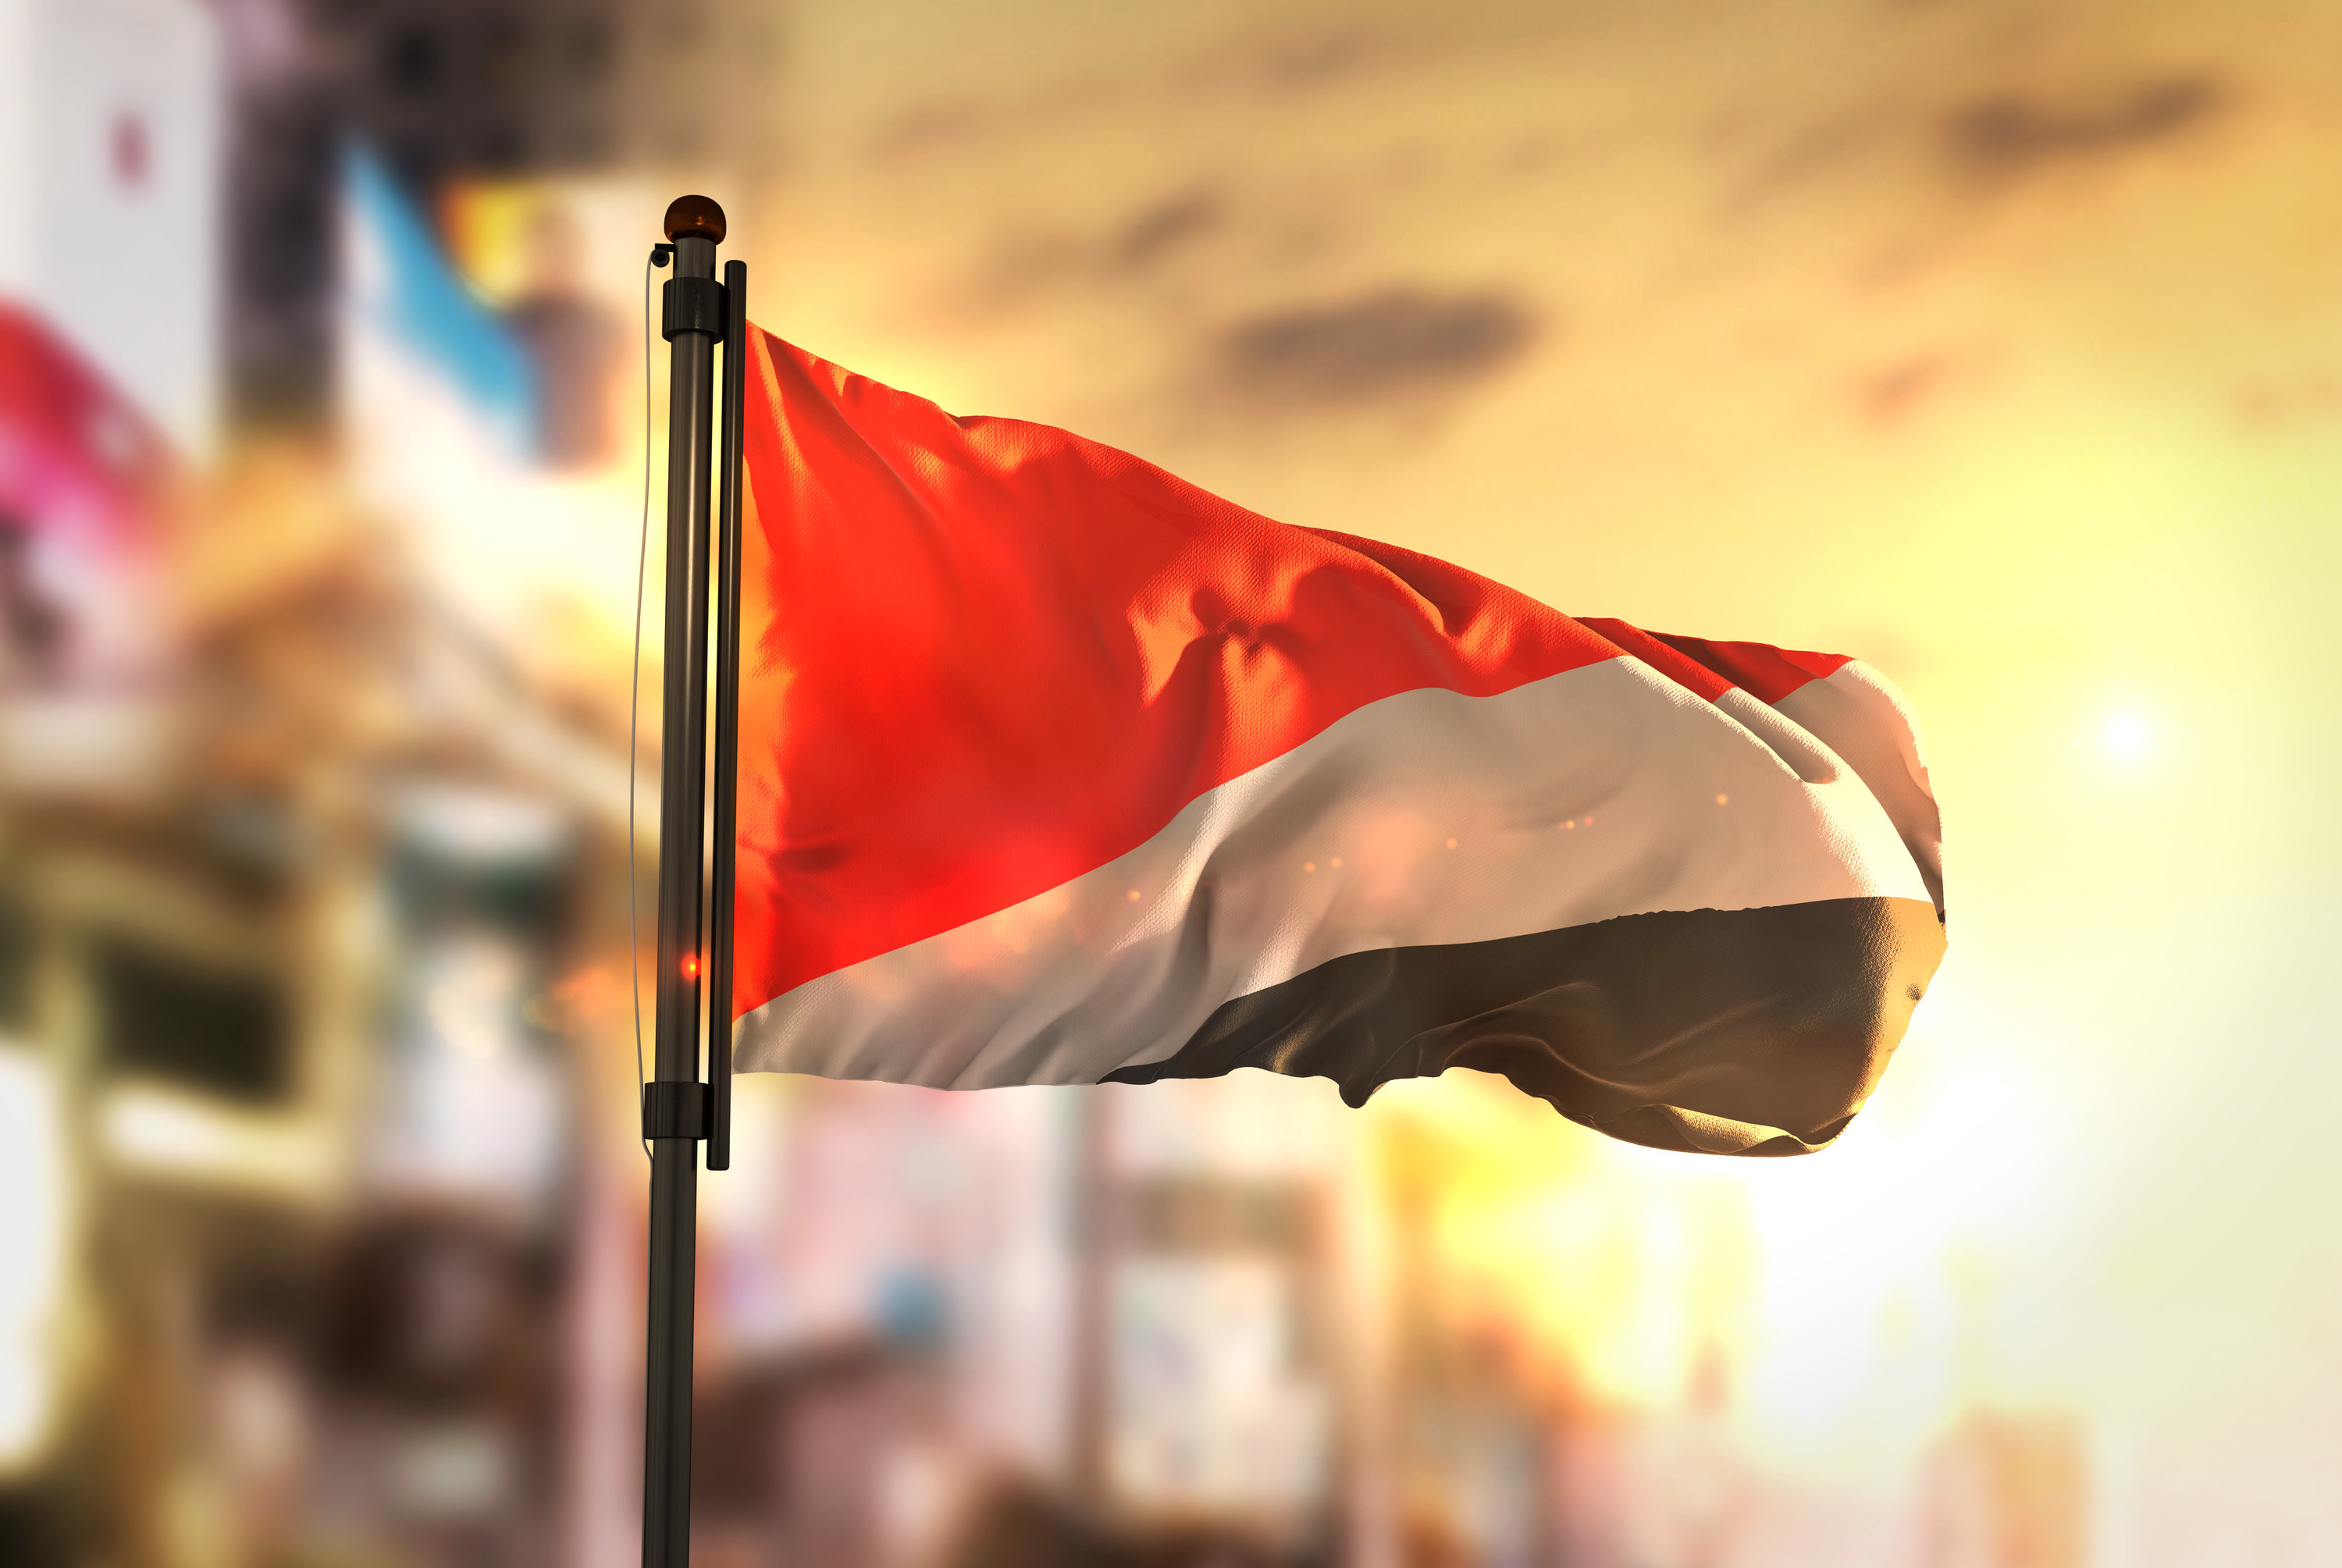 Principality of Sealand Flag Against City Blurred Background At Sunrise Backlight